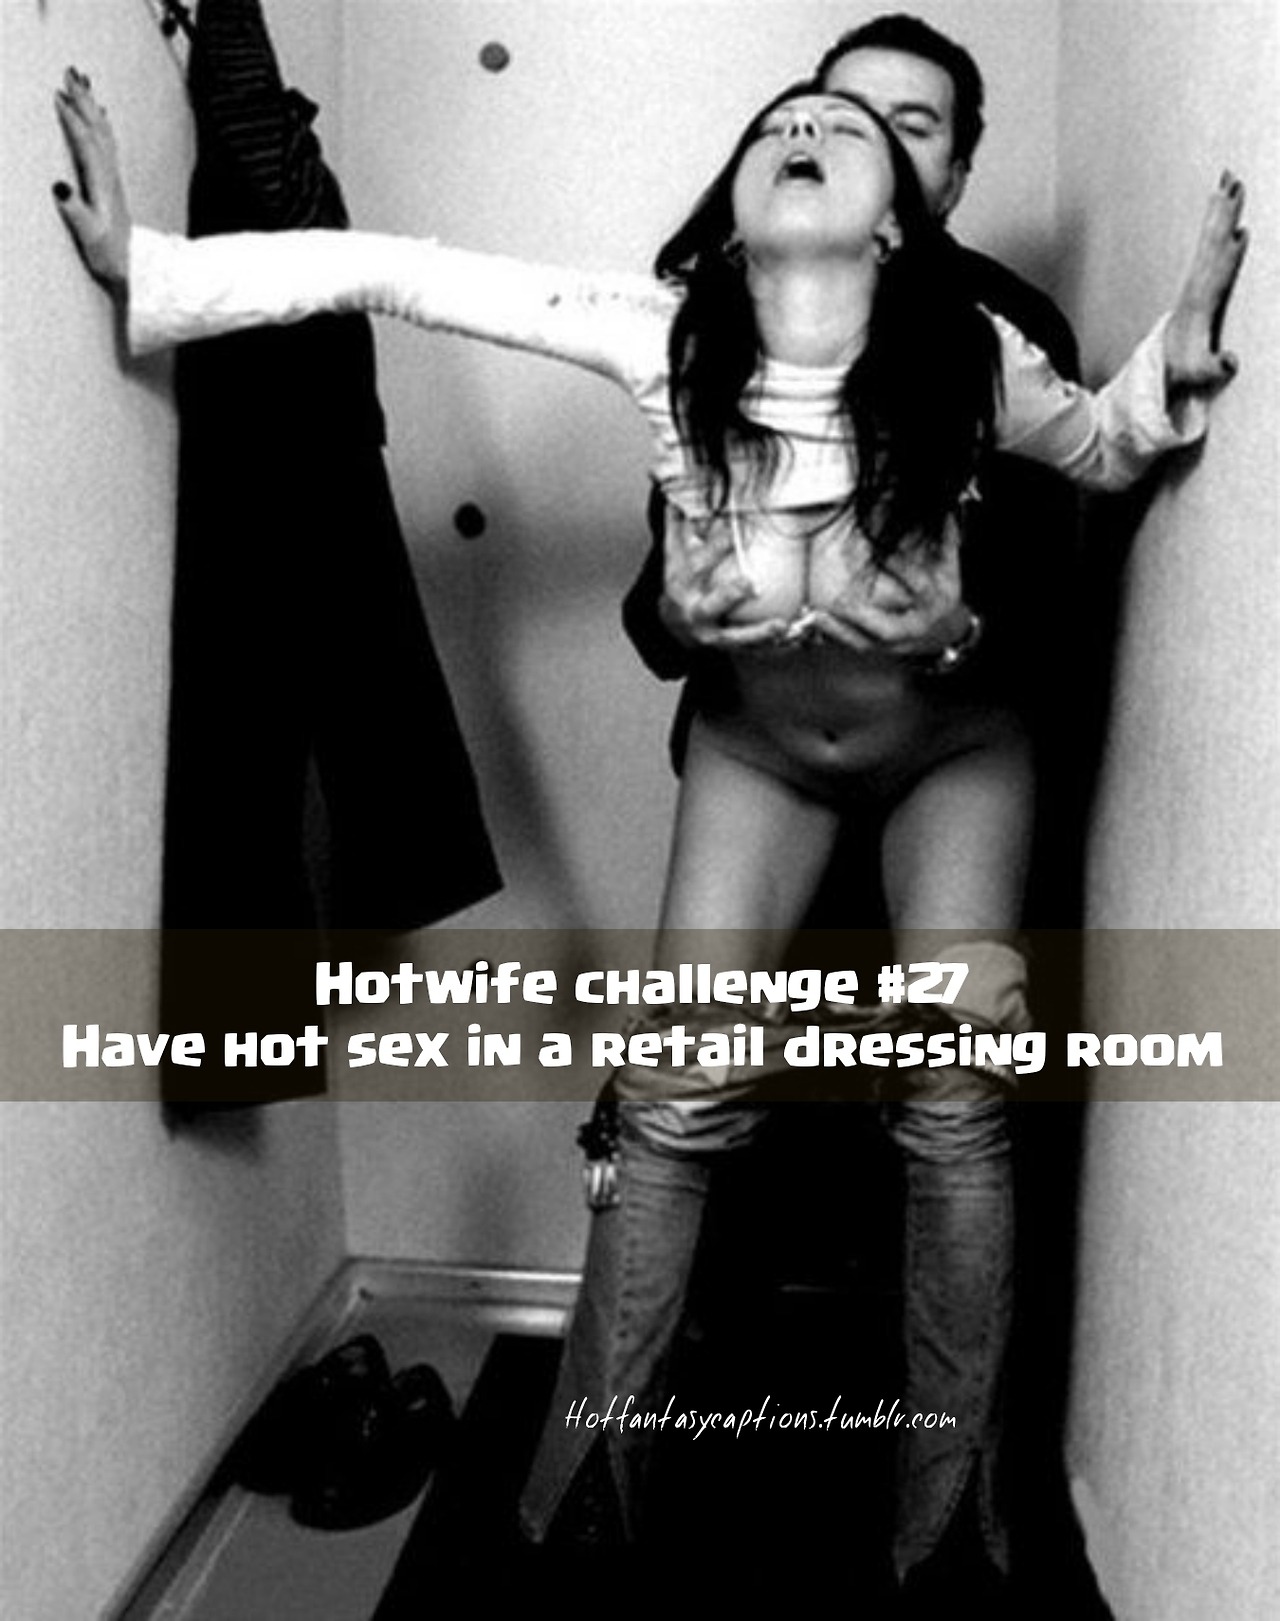 Hotwife challenge #27 - Have hot sex in a dressing room picture